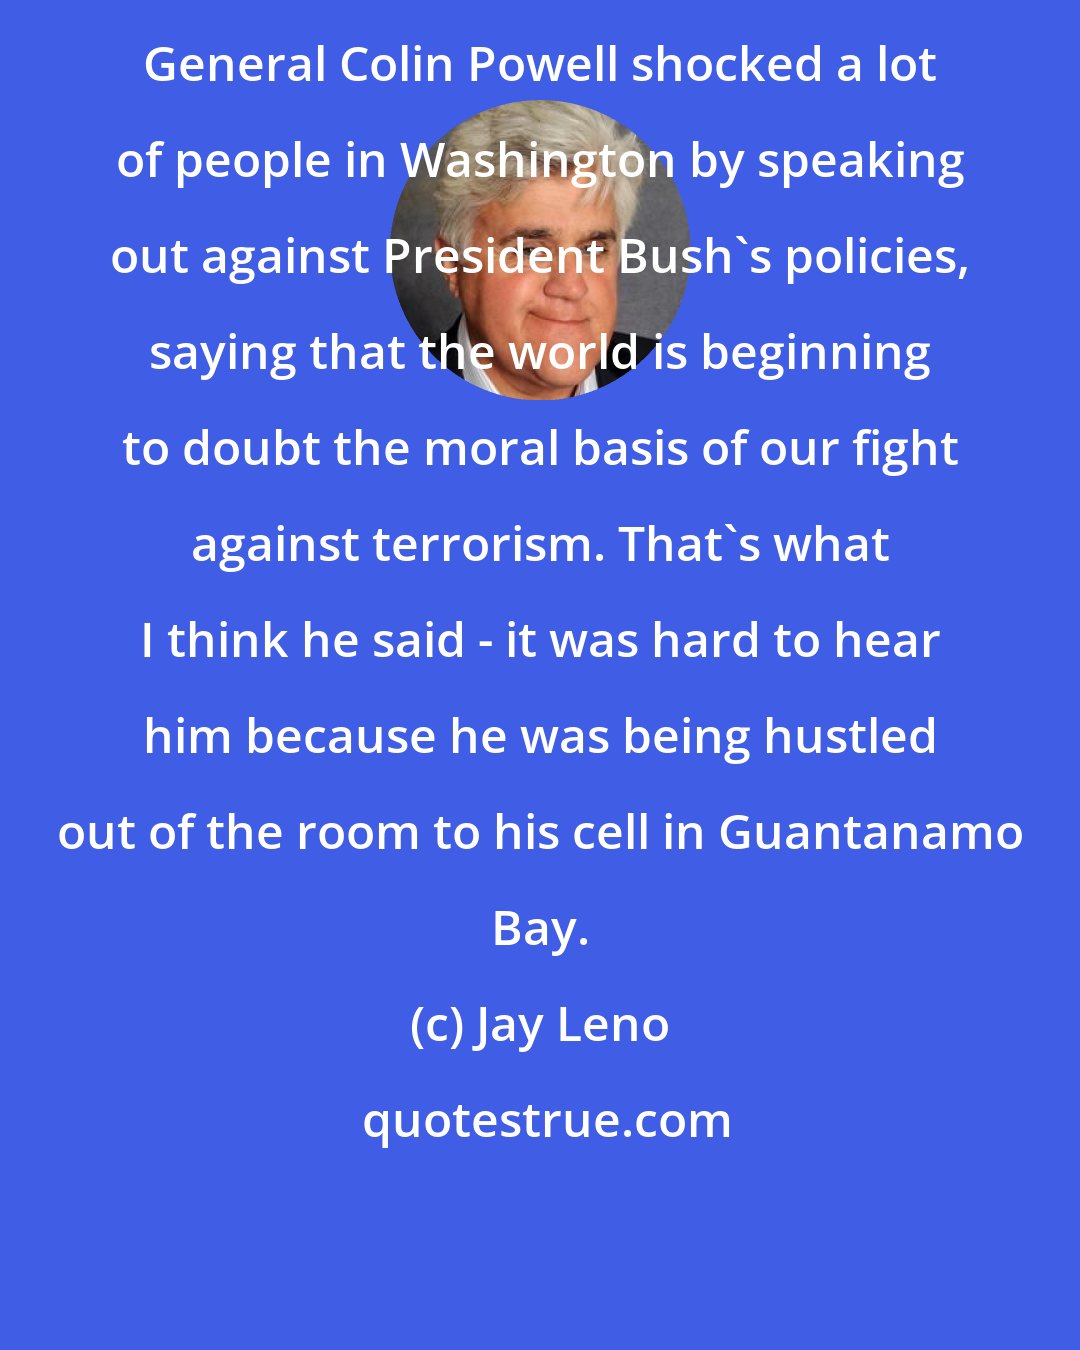 Jay Leno: General Colin Powell shocked a lot of people in Washington by speaking out against President Bush's policies, saying that the world is beginning to doubt the moral basis of our fight against terrorism. That's what I think he said - it was hard to hear him because he was being hustled out of the room to his cell in Guantanamo Bay.